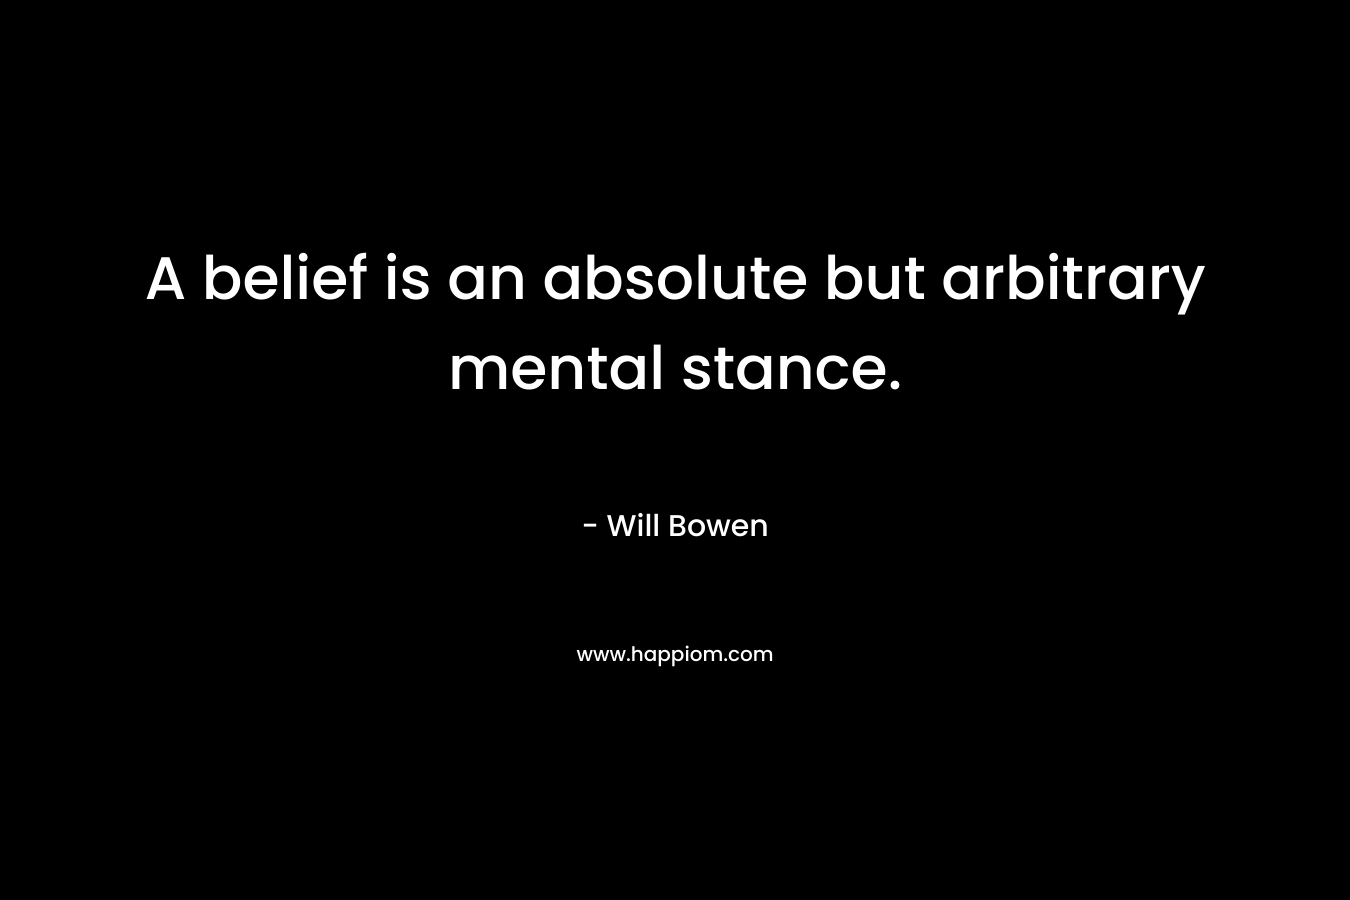 A belief is an absolute but arbitrary mental stance. – Will Bowen